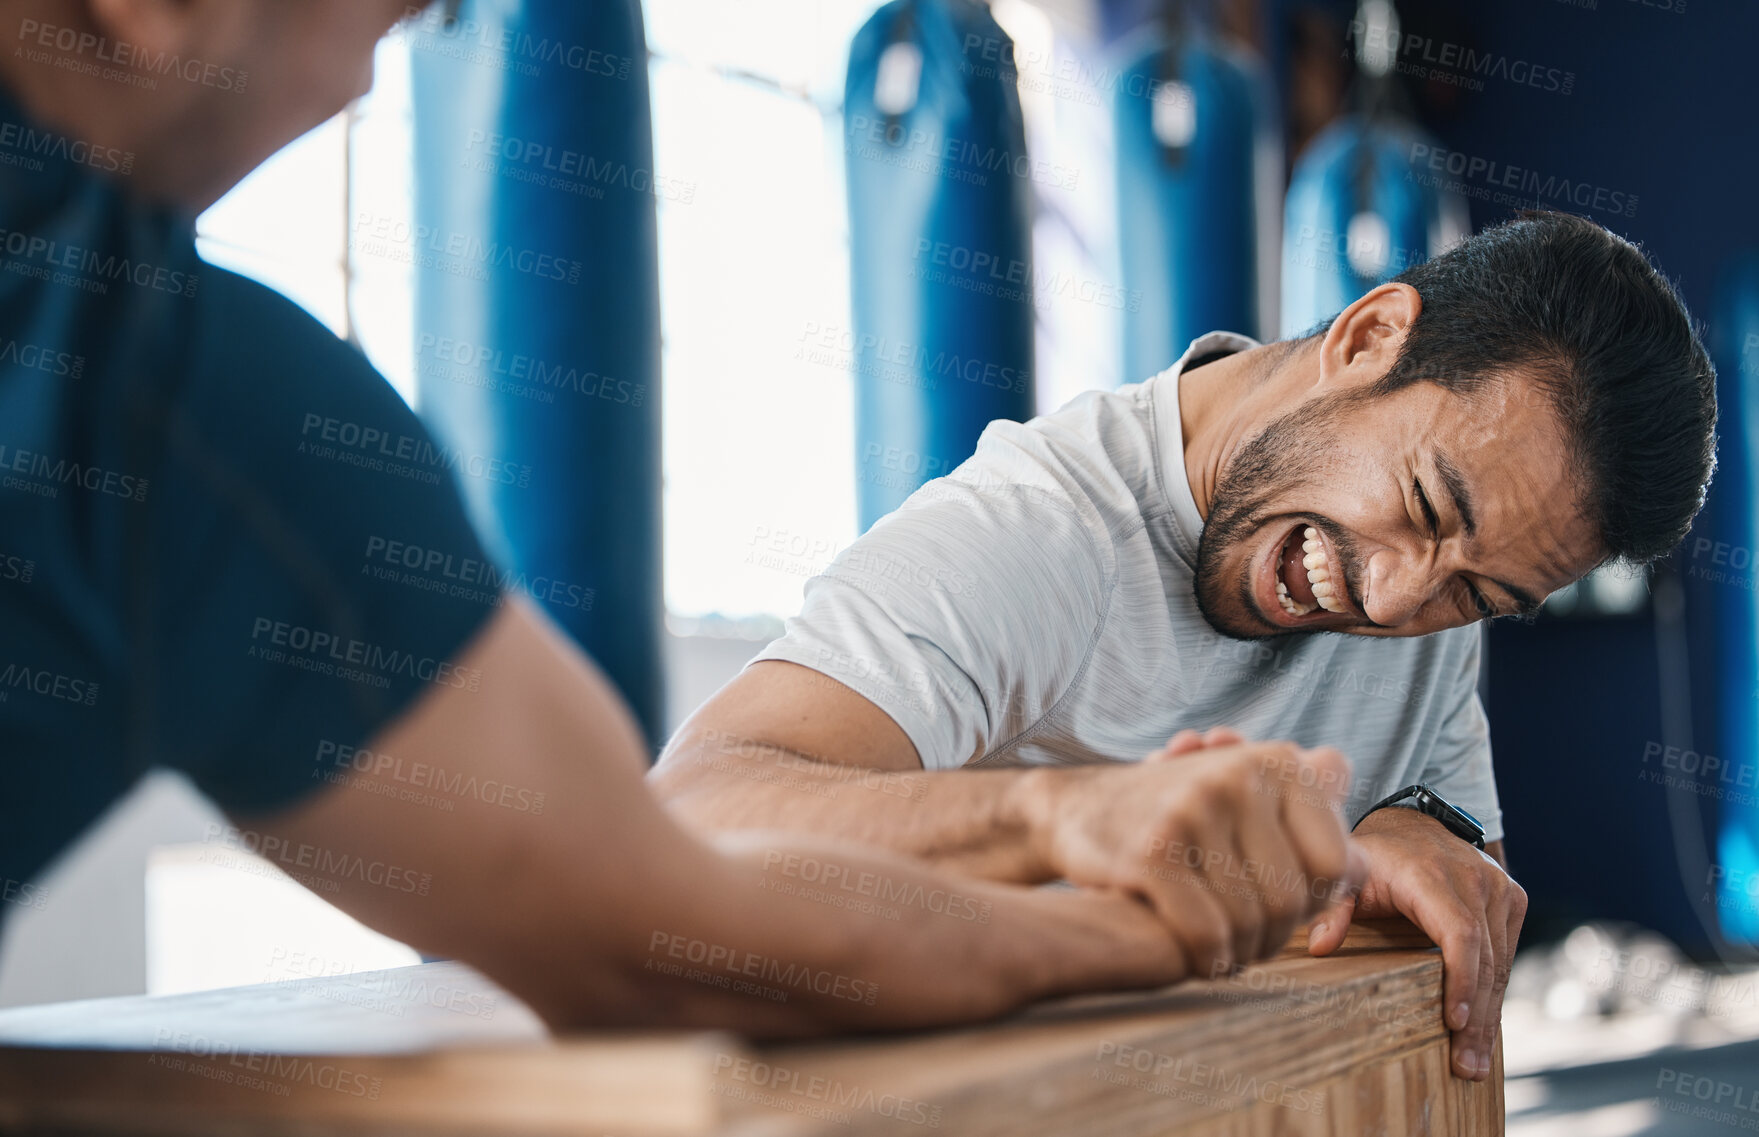 Buy stock photo Strength, motivation and men arm wrestling in a gym on a table while being playful for challenge. Rivalry, game and male people or athletes doing strong muscle battle for fun, bonding and friendship.